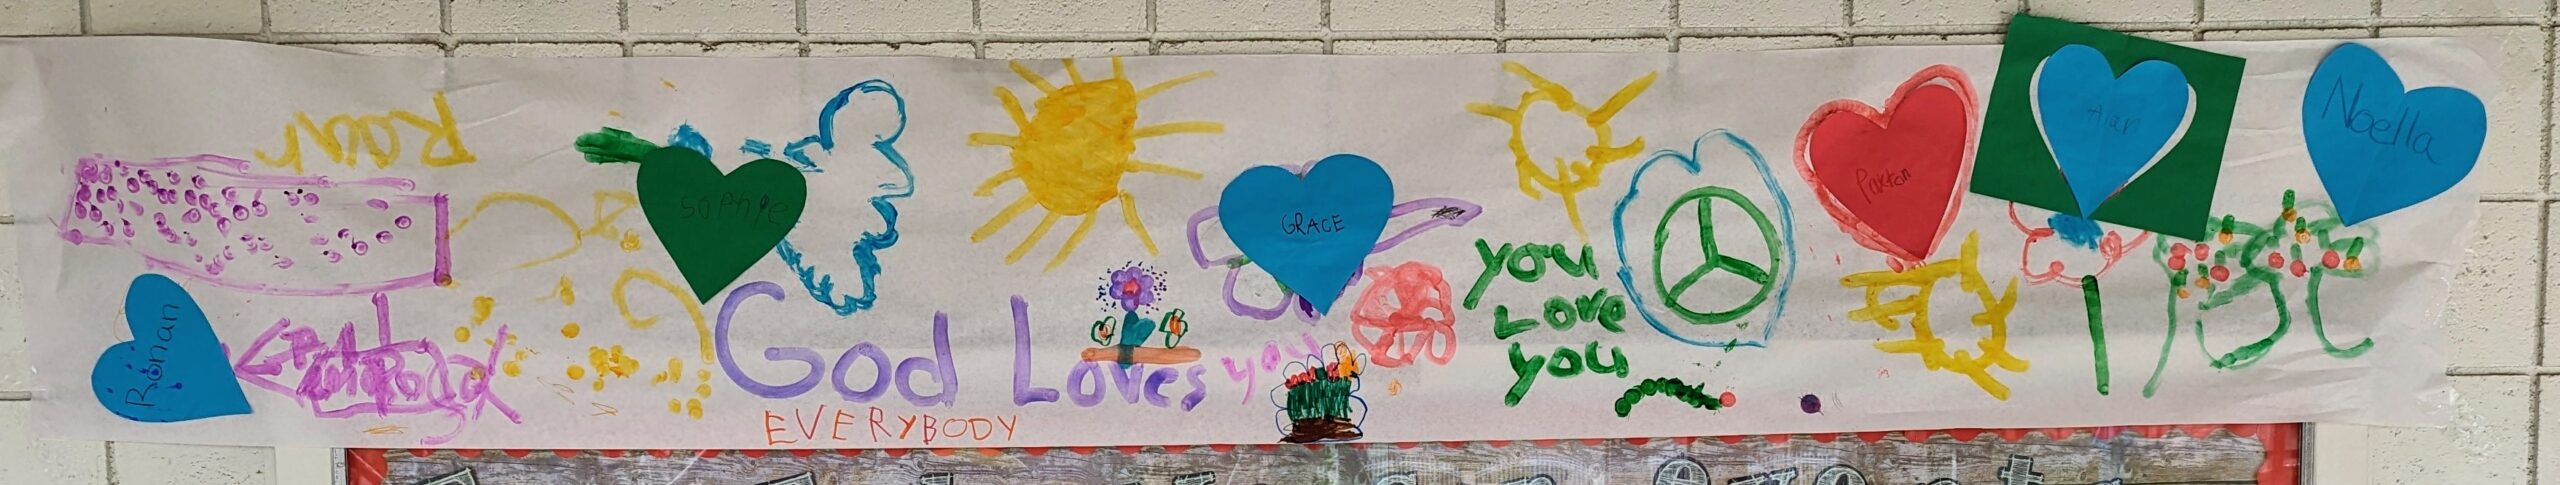 "God Loves Everybody" banner created by the Children Sunday School.